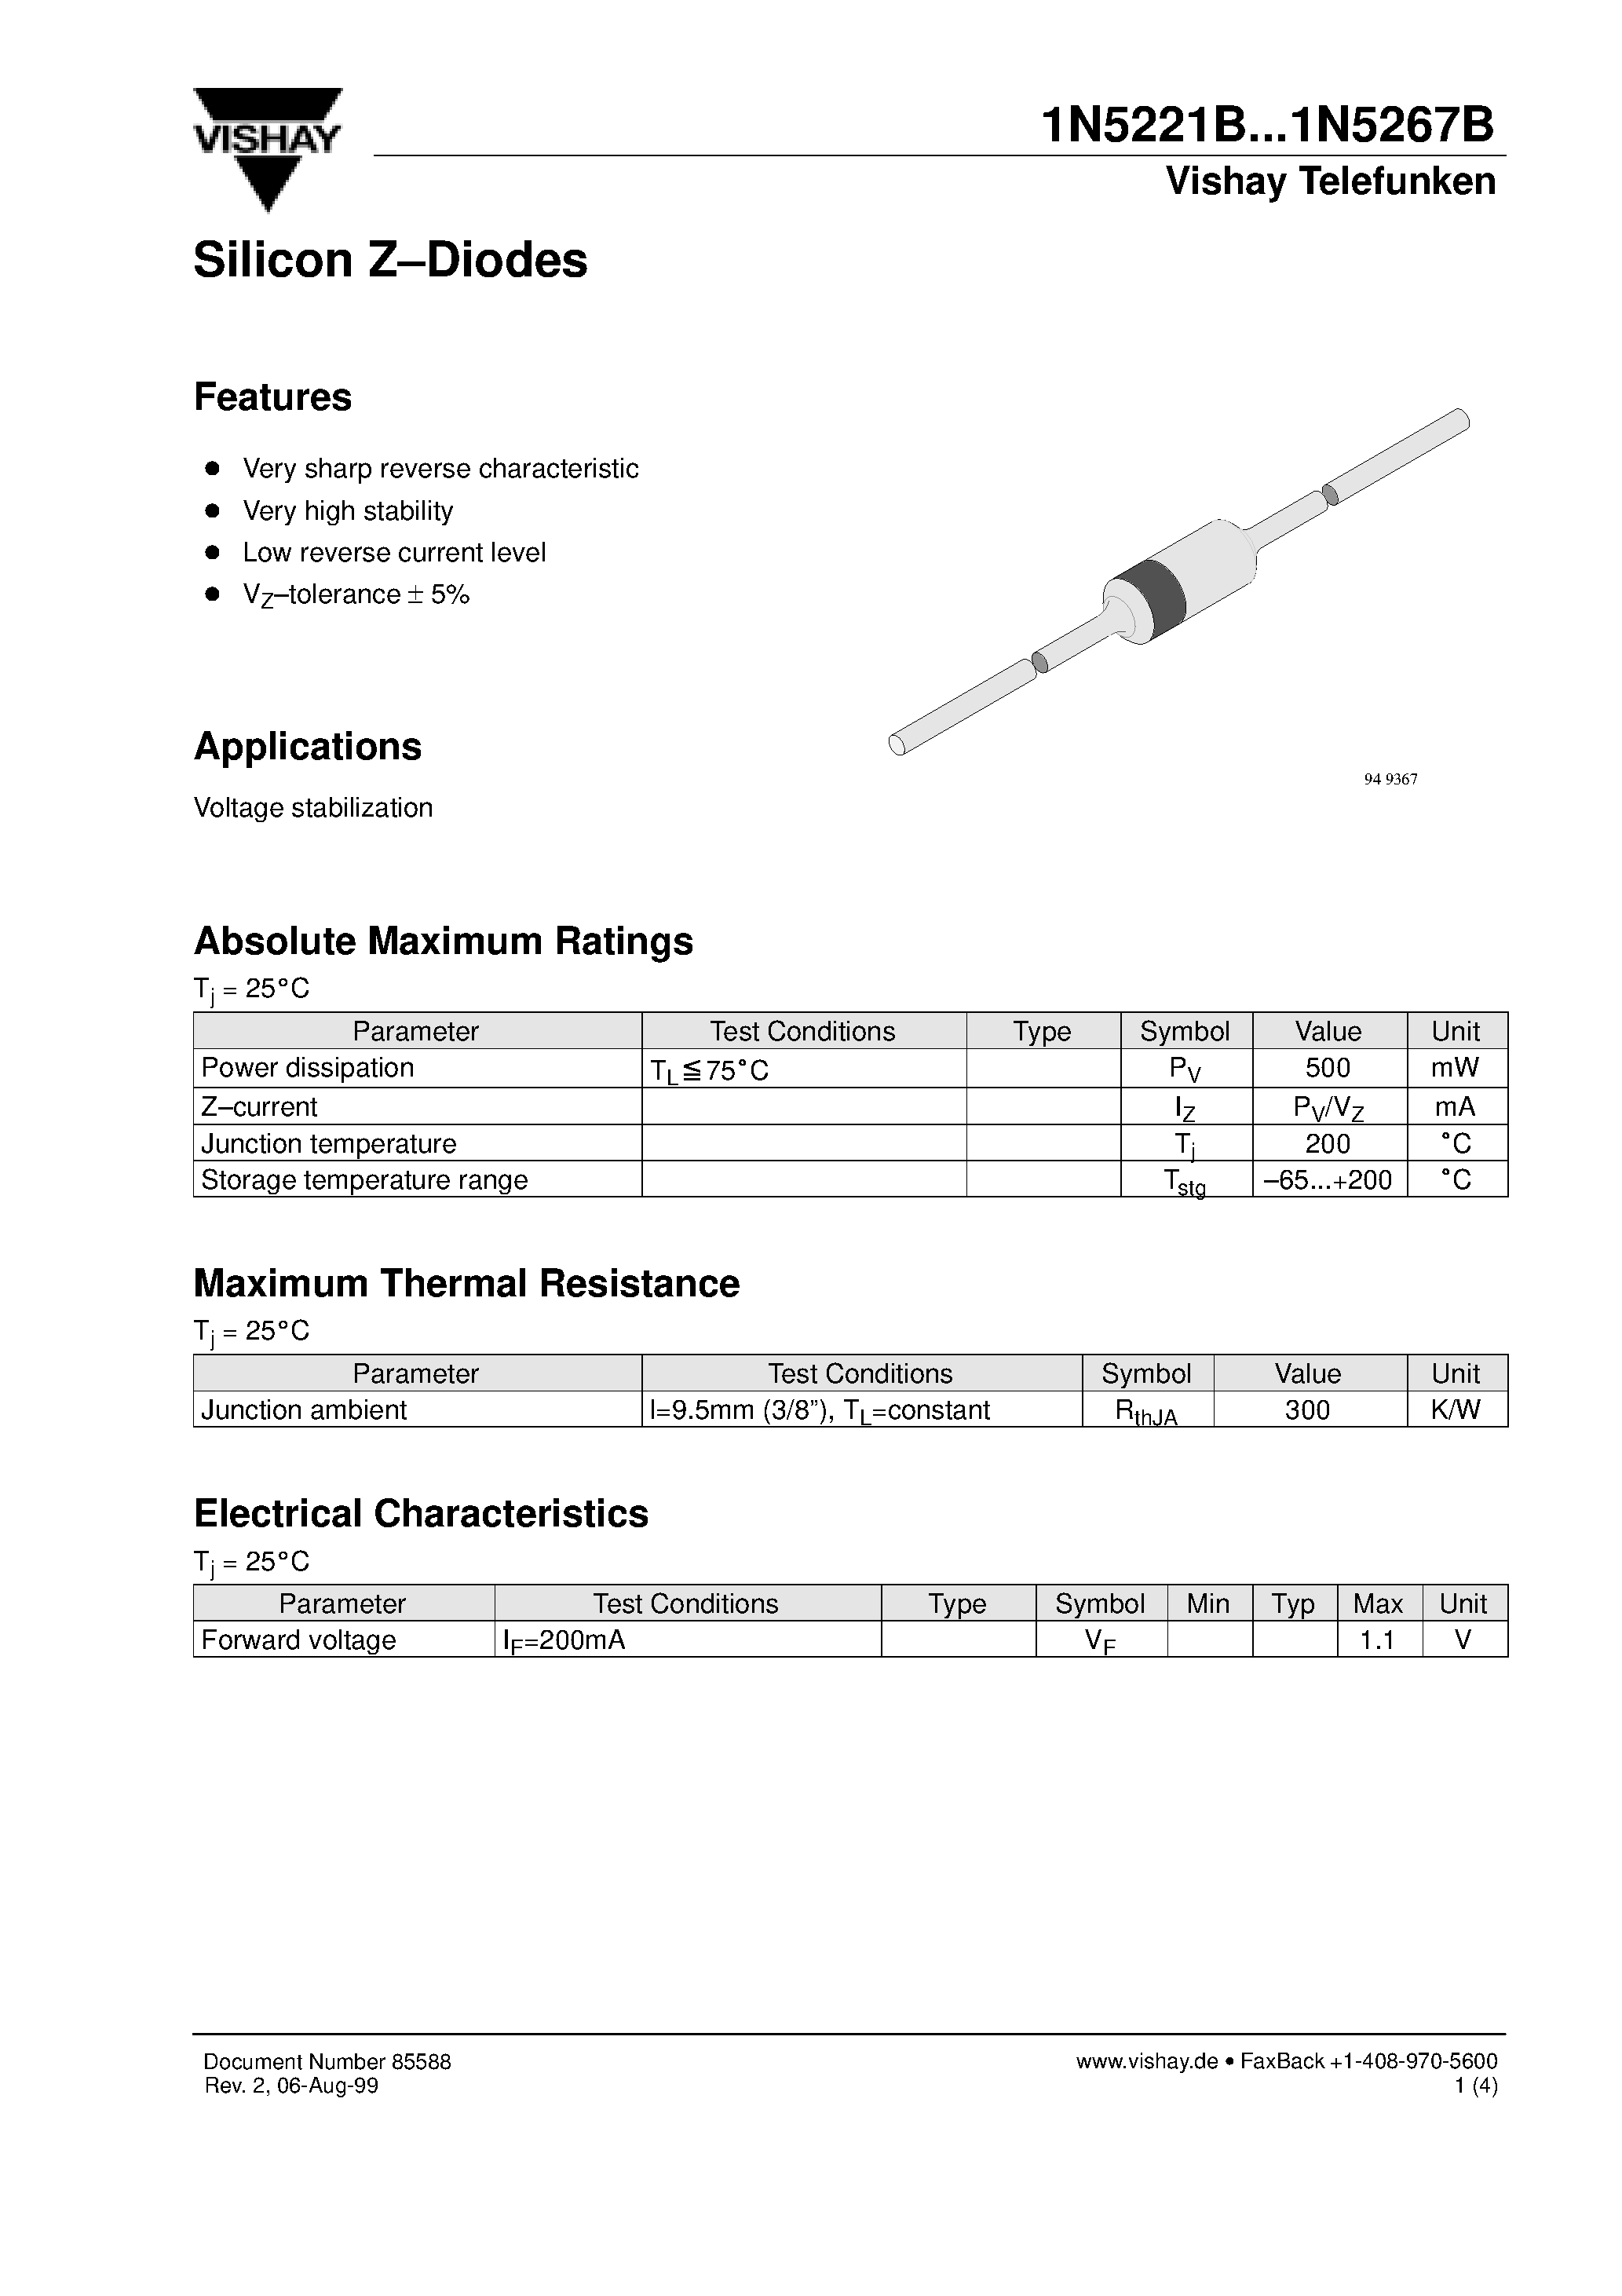 Datasheet 1N5265B - Silicon Z-Diodes page 1